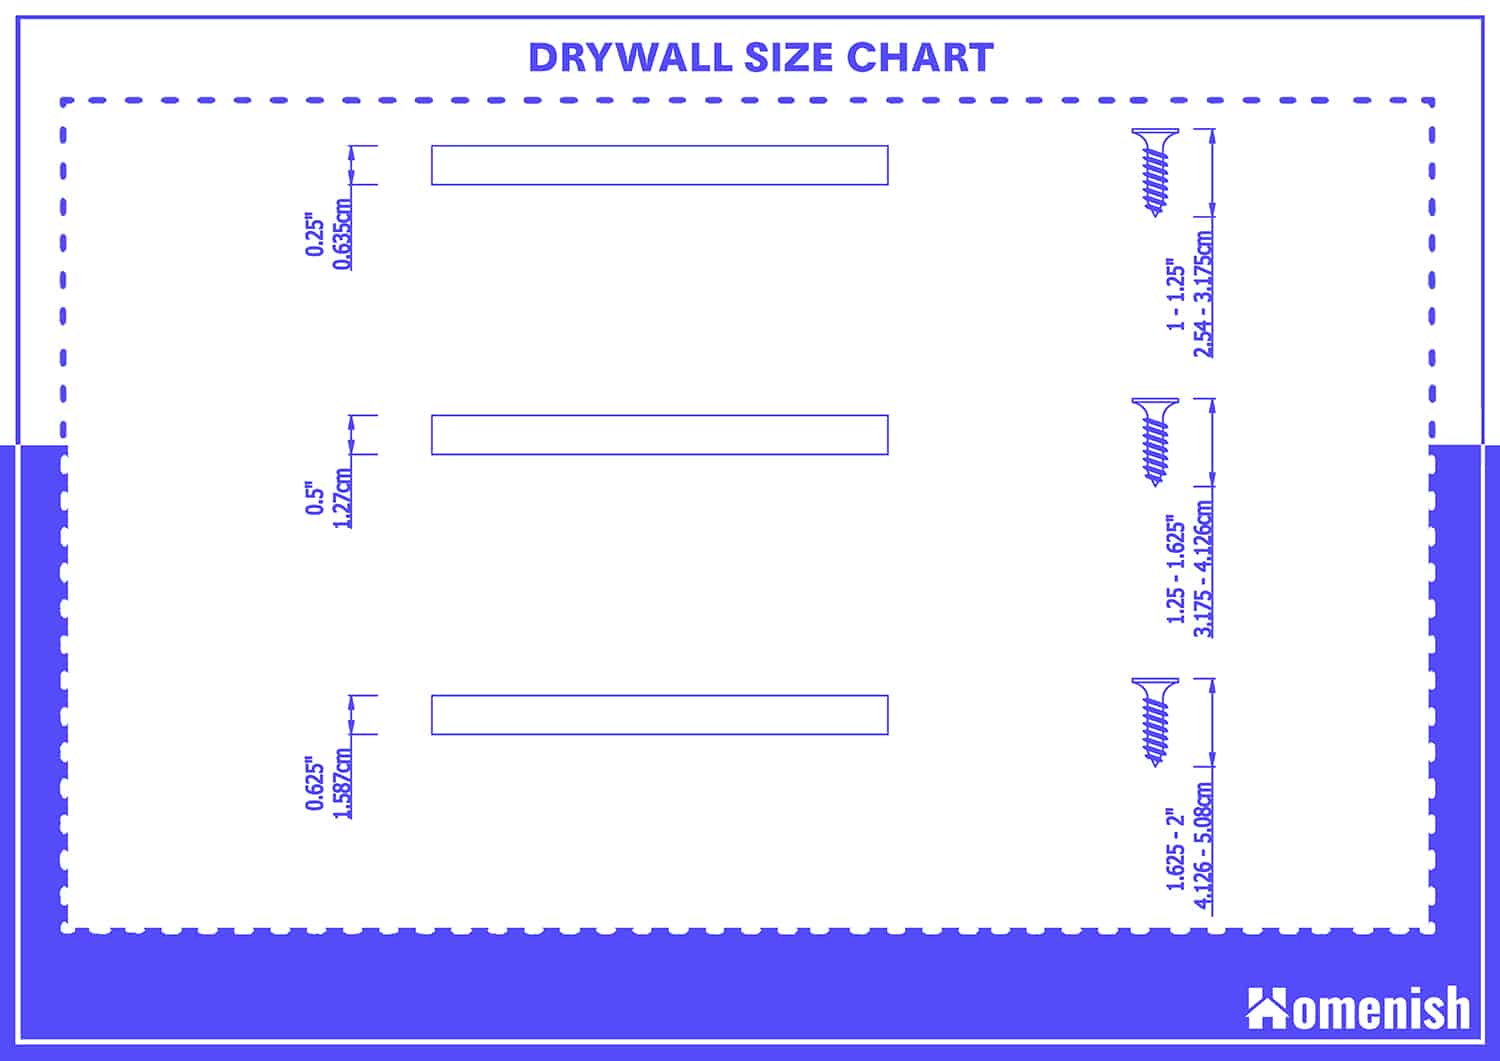 Drywall Size Chart and Recommendations